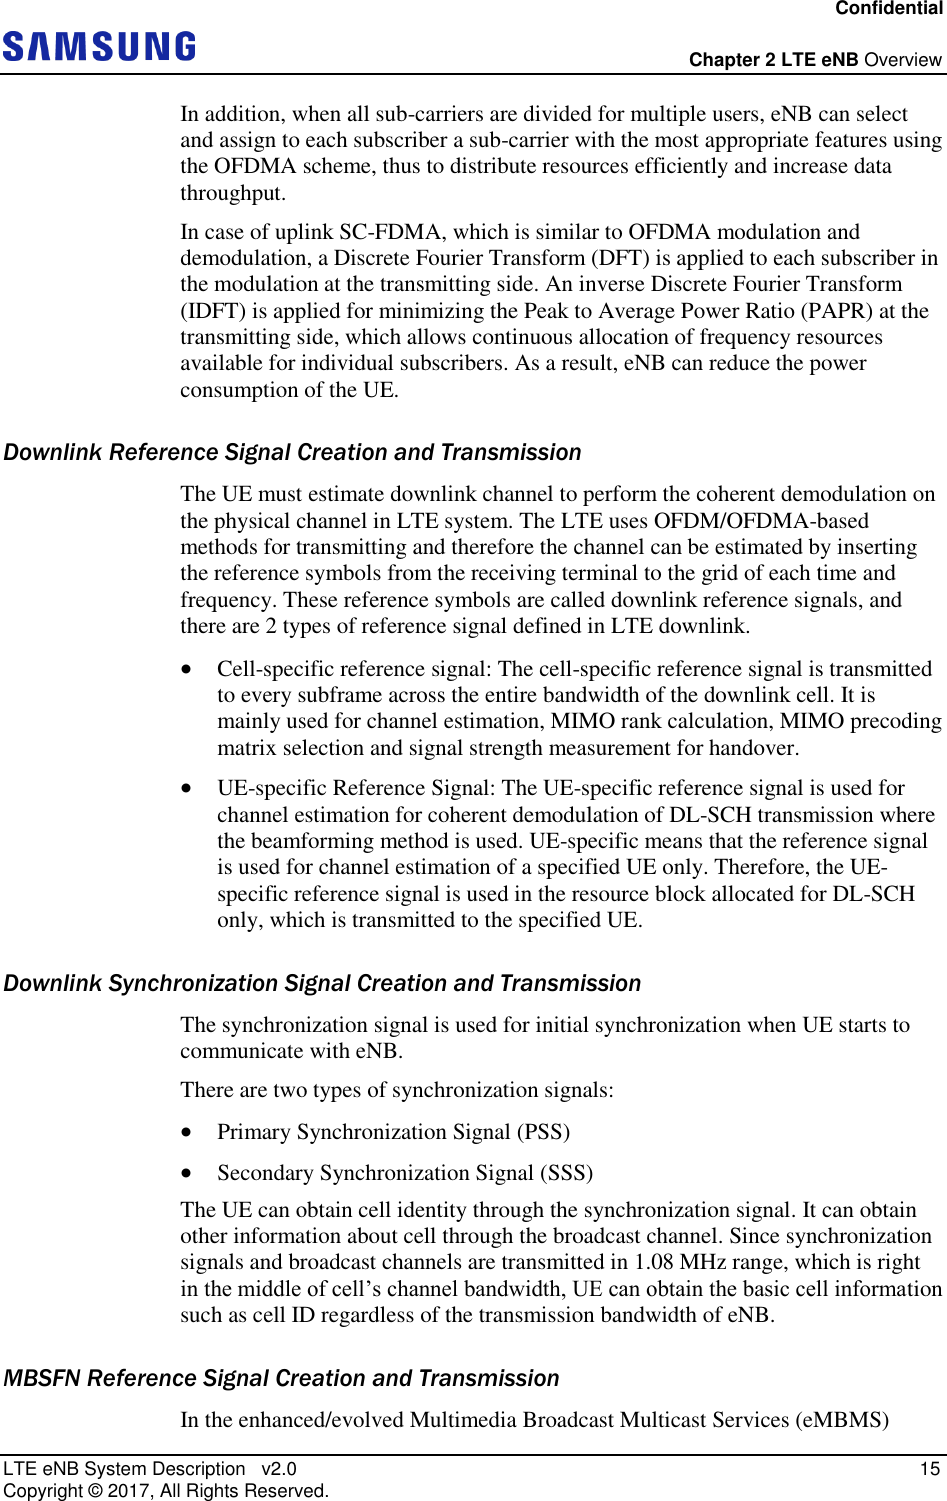 Confidential  Chapter 2 LTE eNB Overview LTE eNB System Description   v2.0   15 Copyright ©  2017, All Rights Reserved. In addition, when all sub-carriers are divided for multiple users, eNB can select and assign to each subscriber a sub-carrier with the most appropriate features using the OFDMA scheme, thus to distribute resources efficiently and increase data throughput. In case of uplink SC-FDMA, which is similar to OFDMA modulation and demodulation, a Discrete Fourier Transform (DFT) is applied to each subscriber in the modulation at the transmitting side. An inverse Discrete Fourier Transform (IDFT) is applied for minimizing the Peak to Average Power Ratio (PAPR) at the transmitting side, which allows continuous allocation of frequency resources available for individual subscribers. As a result, eNB can reduce the power consumption of the UE. Downlink Reference Signal Creation and Transmission The UE must estimate downlink channel to perform the coherent demodulation on the physical channel in LTE system. The LTE uses OFDM/OFDMA-based methods for transmitting and therefore the channel can be estimated by inserting the reference symbols from the receiving terminal to the grid of each time and frequency. These reference symbols are called downlink reference signals, and there are 2 types of reference signal defined in LTE downlink.  Cell-specific reference signal: The cell-specific reference signal is transmitted to every subframe across the entire bandwidth of the downlink cell. It is mainly used for channel estimation, MIMO rank calculation, MIMO precoding matrix selection and signal strength measurement for handover.  UE-specific Reference Signal: The UE-specific reference signal is used for channel estimation for coherent demodulation of DL-SCH transmission where the beamforming method is used. UE-specific means that the reference signal is used for channel estimation of a specified UE only. Therefore, the UE-specific reference signal is used in the resource block allocated for DL-SCH only, which is transmitted to the specified UE. Downlink Synchronization Signal Creation and Transmission The synchronization signal is used for initial synchronization when UE starts to communicate with eNB. There are two types of synchronization signals:  Primary Synchronization Signal (PSS)  Secondary Synchronization Signal (SSS) The UE can obtain cell identity through the synchronization signal. It can obtain other information about cell through the broadcast channel. Since synchronization signals and broadcast channels are transmitted in 1.08 MHz range, which is right in the middle of cell’s channel bandwidth, UE can obtain the basic cell information such as cell ID regardless of the transmission bandwidth of eNB. MBSFN Reference Signal Creation and Transmission In the enhanced/evolved Multimedia Broadcast Multicast Services (eMBMS) 